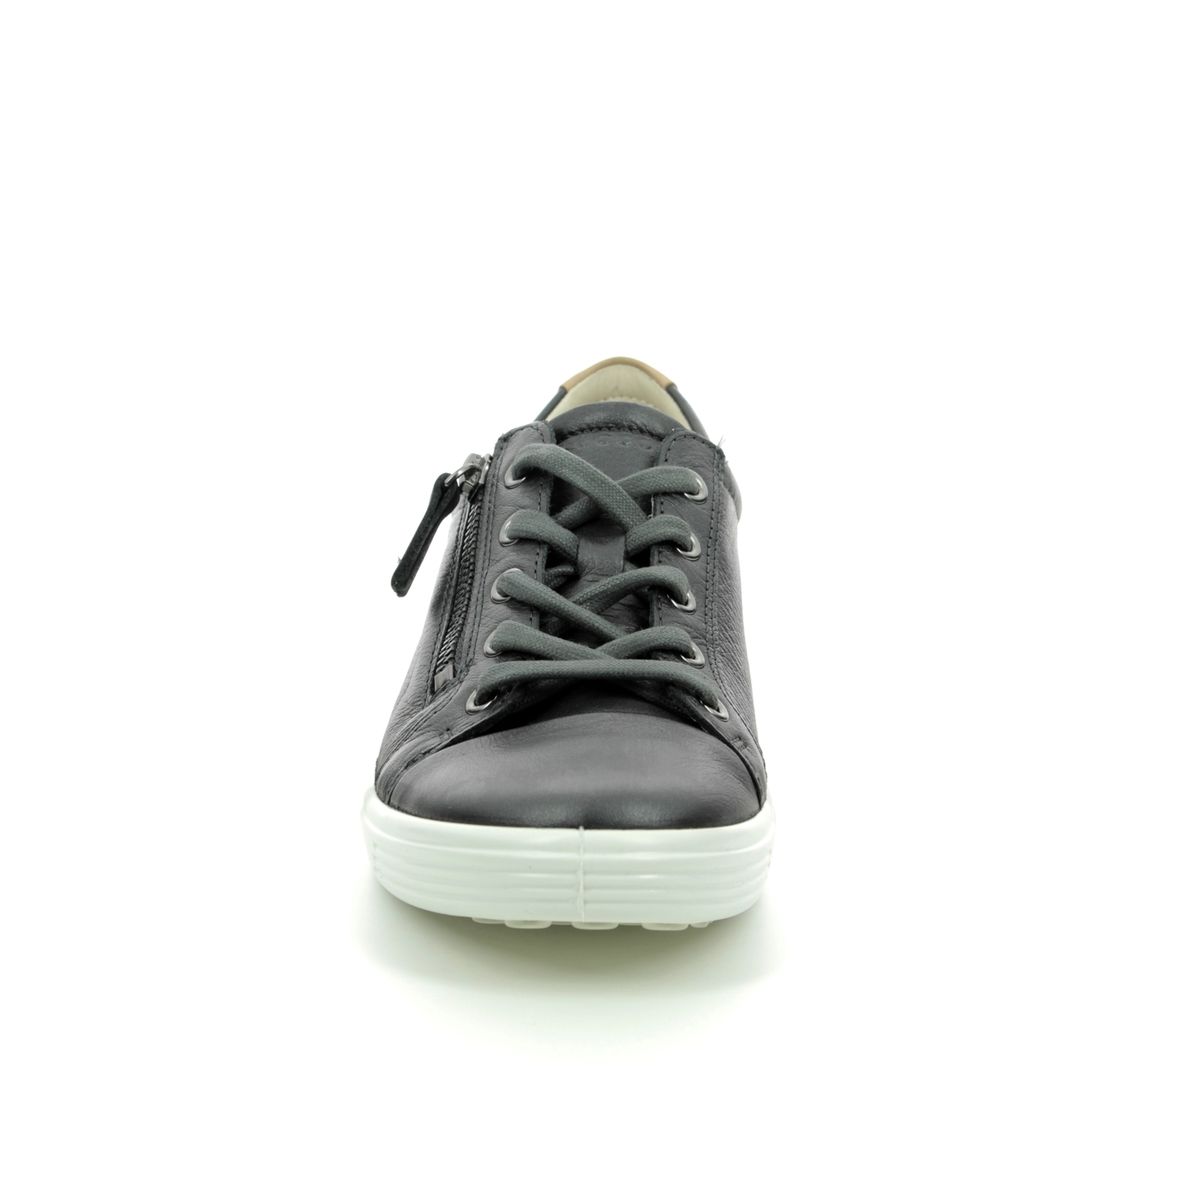 Soft 7 Zip Dark Grey Leather lacing shoes